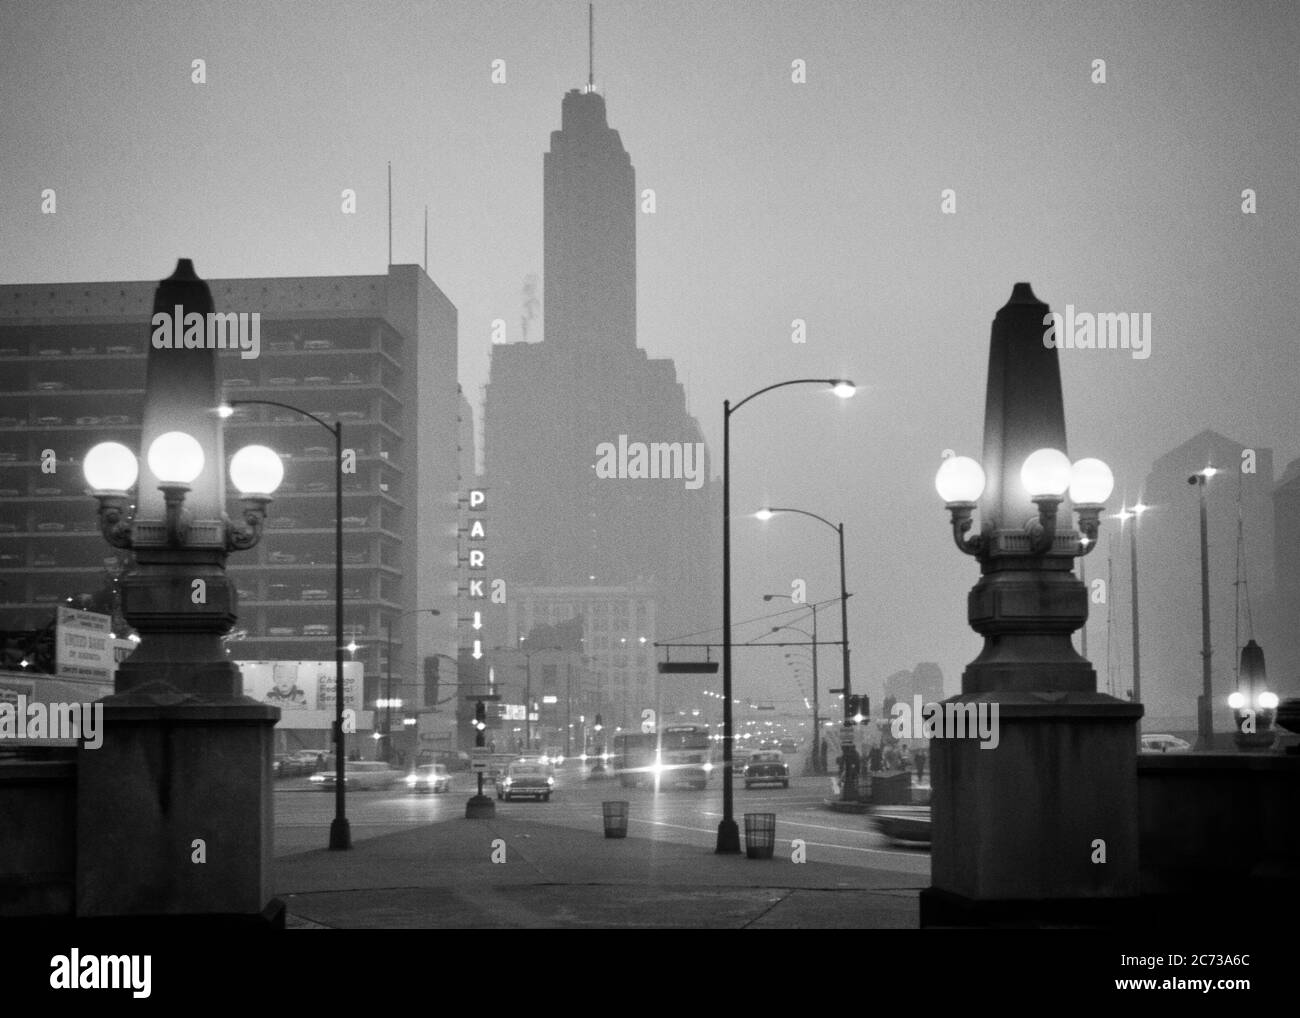 1960s OBELISK LAMPPOSTS ON WACKER DRIVE DOWNTOWN TRAFFIC ON FOGGY NIGHT ALONG CHICAGO RIVER CHICAGO ILLINOIS USA  - r20452 HAR001 HARS MIST VEHICLES EDIFICE ILLINOIS BLACK AND WHITE HAR001 IL LAMPPOSTS MIDWEST MIDWESTERN OBELISK OLD FASHIONED Stock Photo